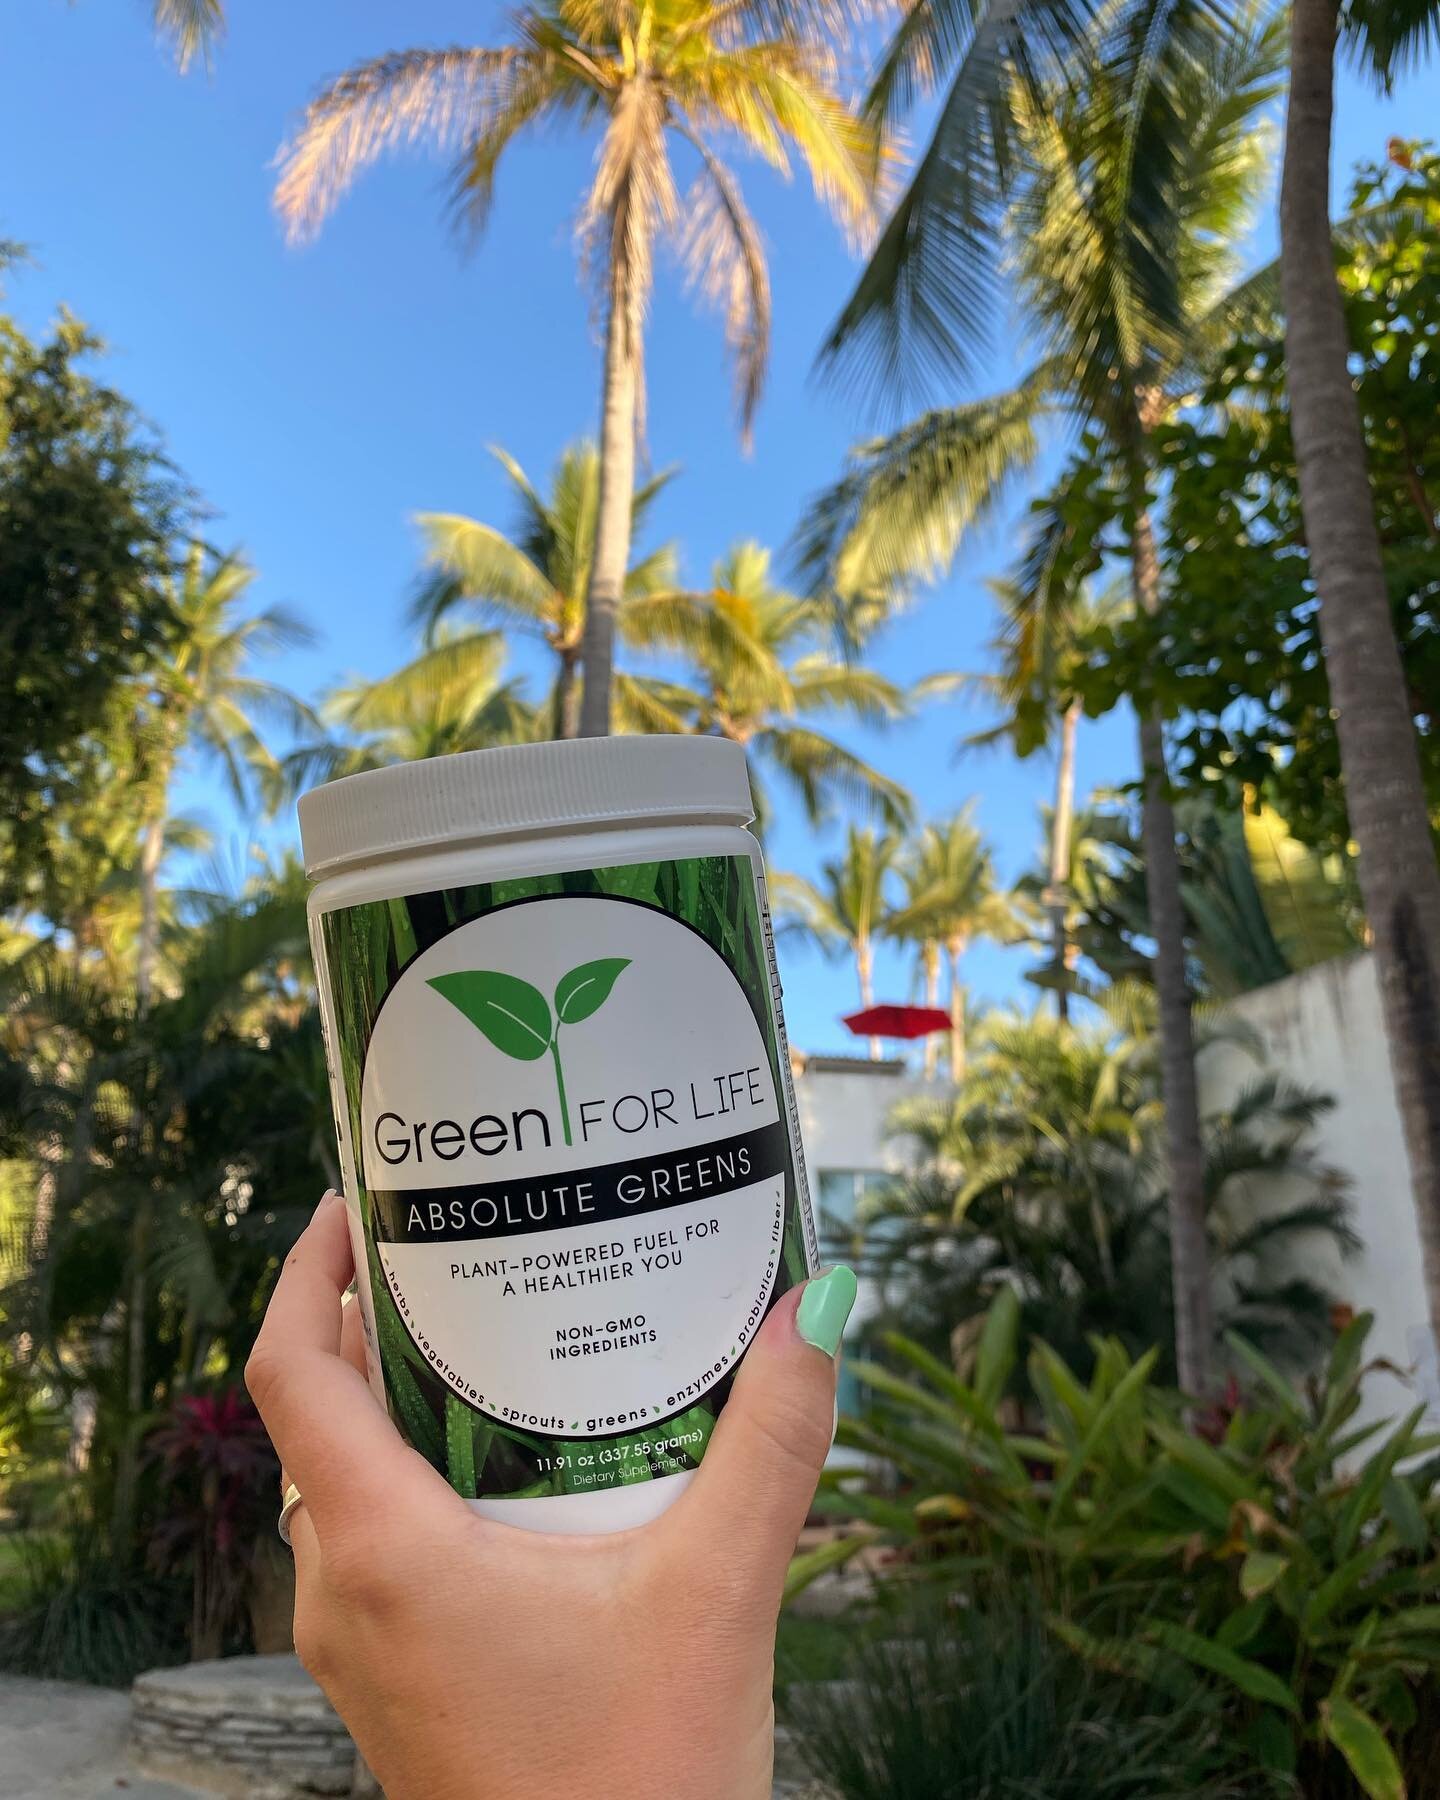 Feel the power of our absolute greens energizing and fueling you!

Purchase at greenforlifenow.com
The best tasting greens out there 
#supplements #greens #superfoods #organic #allnatural #fuel #healthy #greenforlife